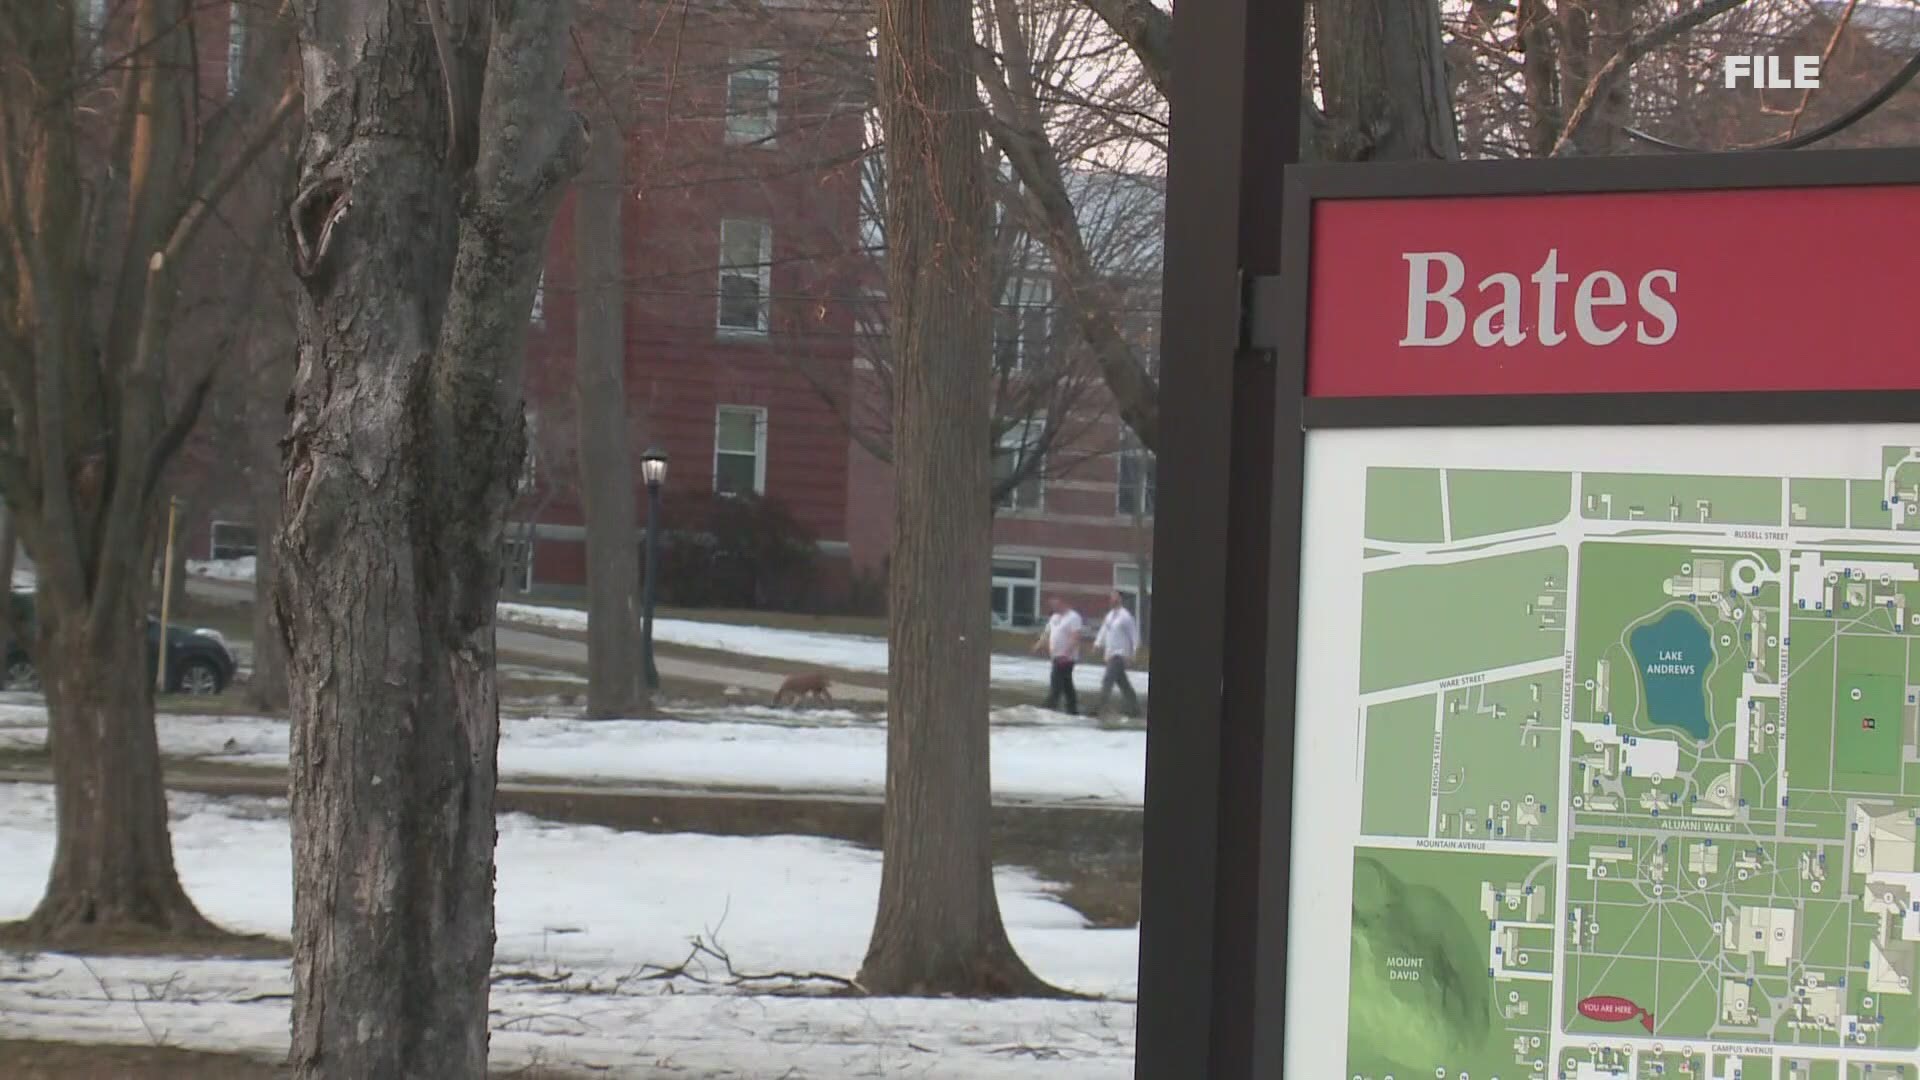 Today bates college announced in person classes and co-curricular programs can resume starting tomorrow.